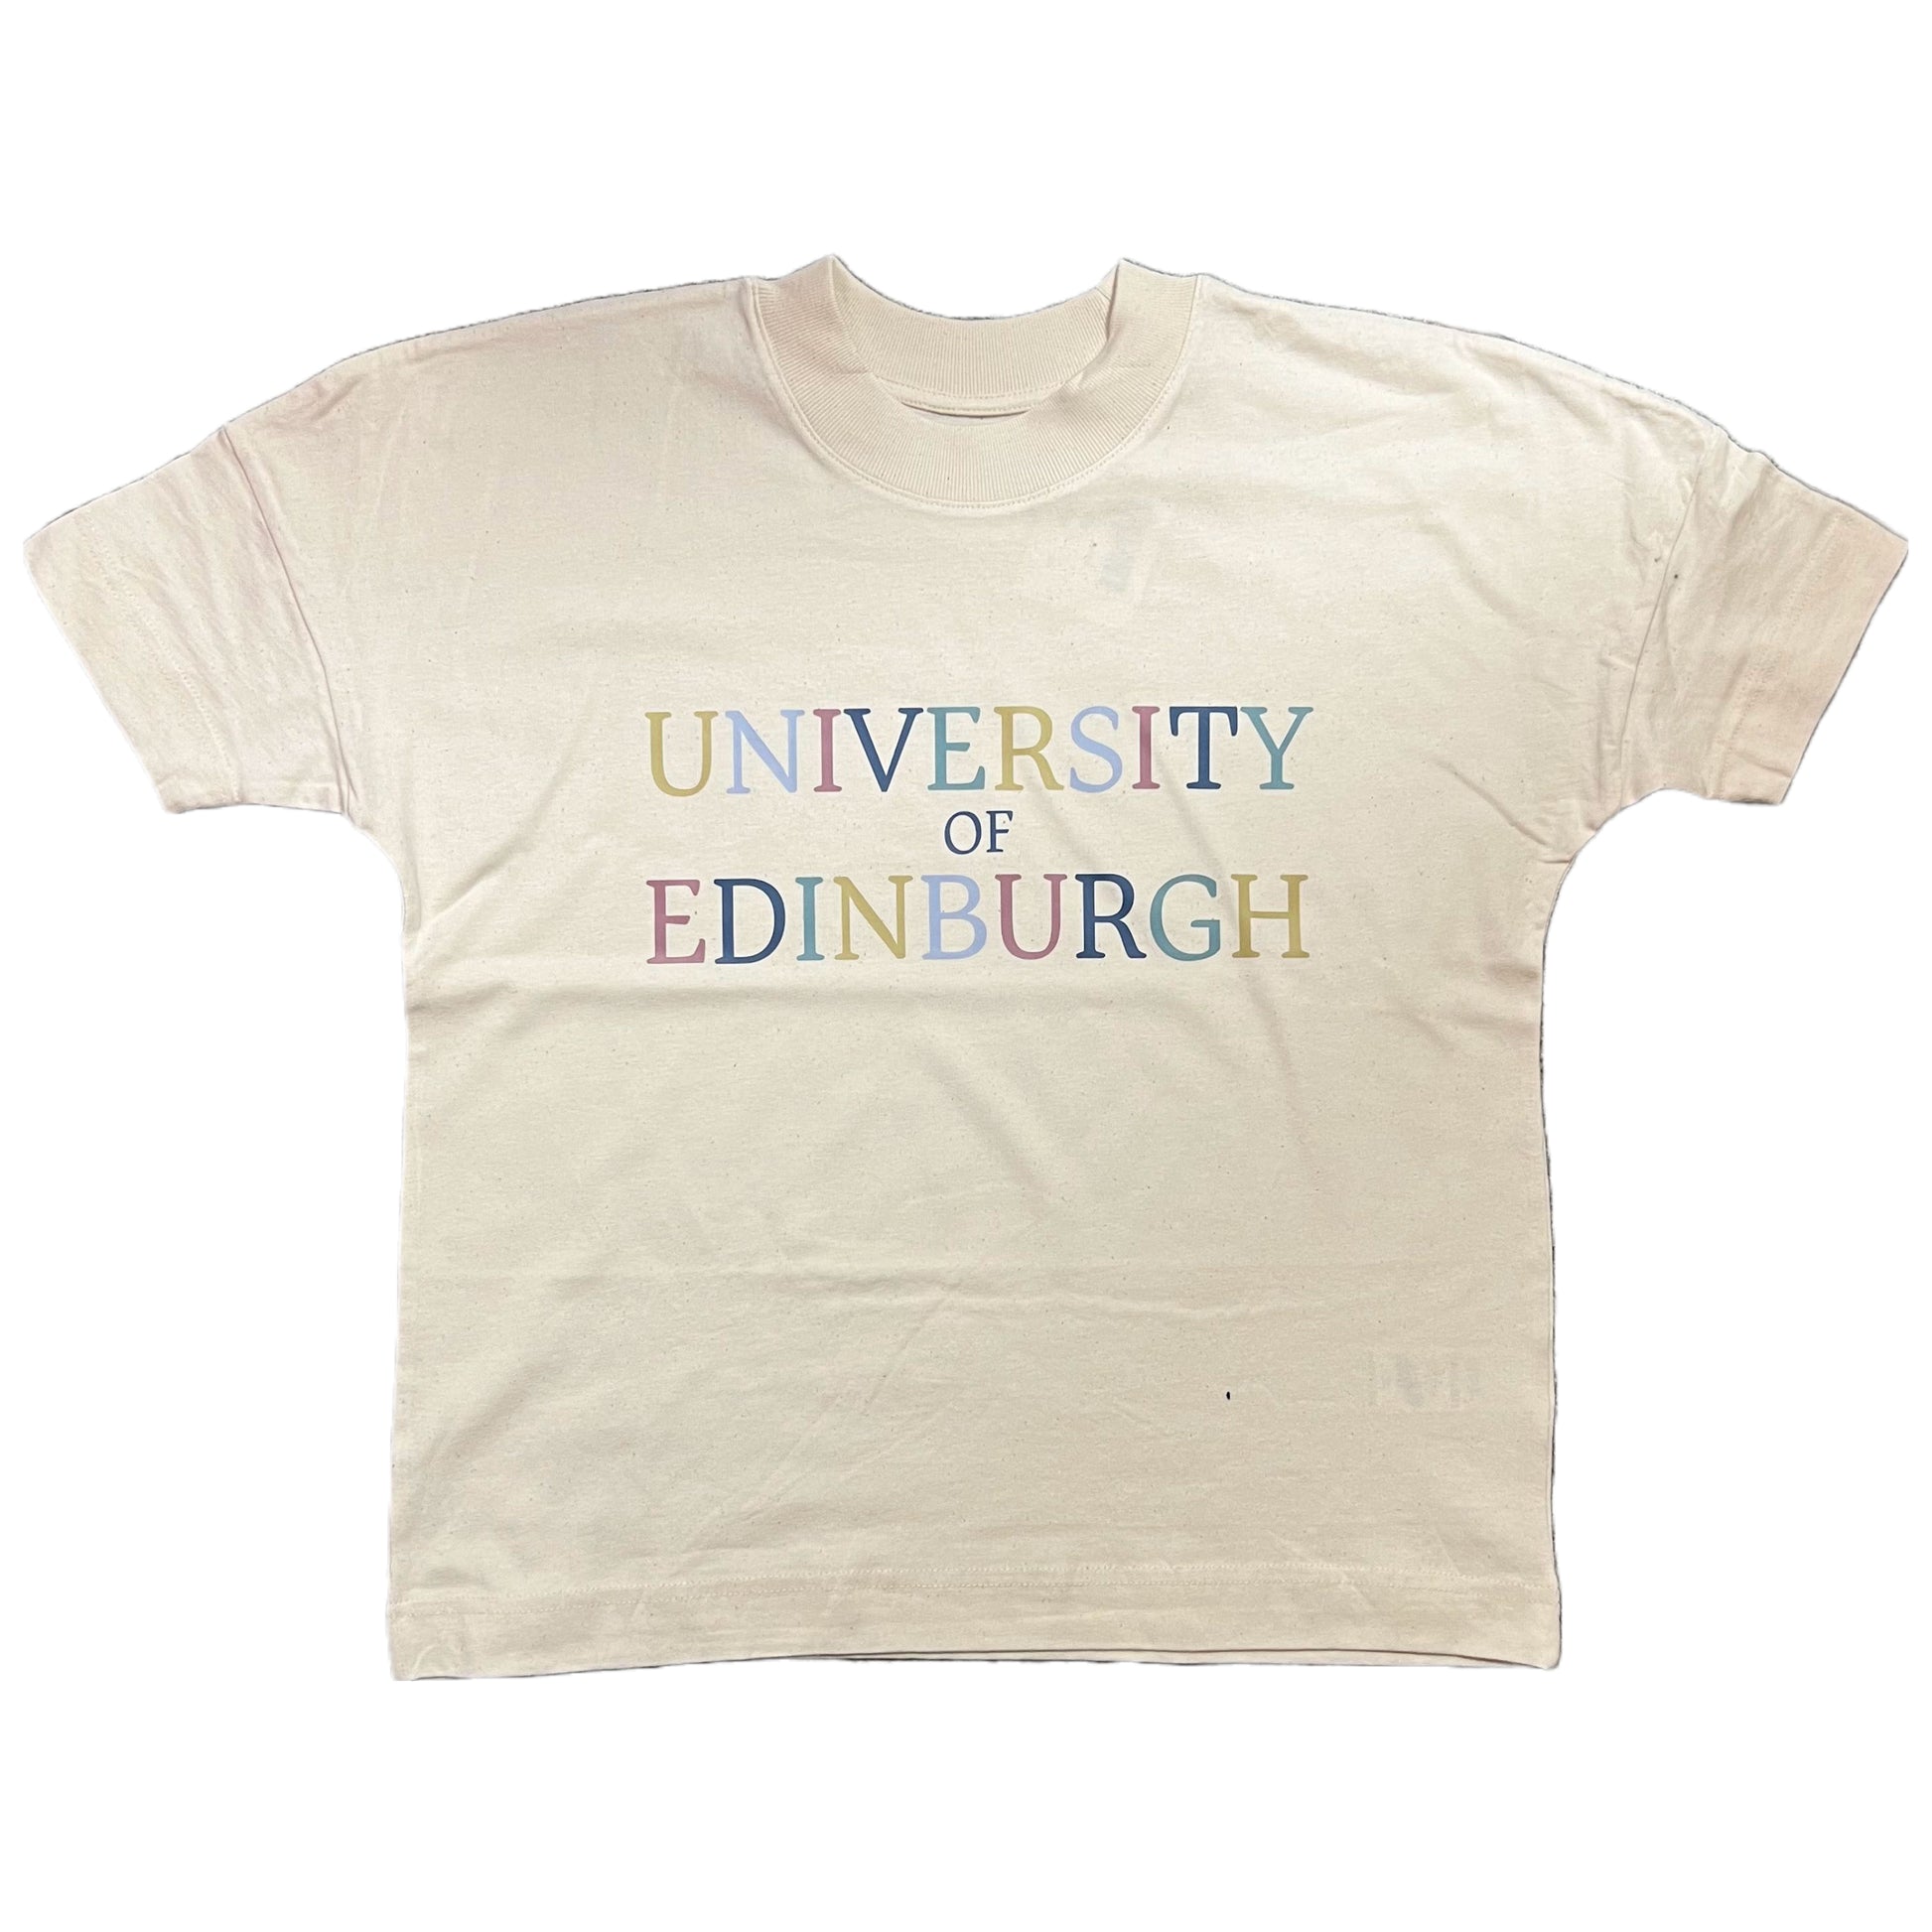 Pictured is Colourful Oversized T-shirt in Natural (Sandy White). Text reads 'University of Edinburgh' in colourful lettering.